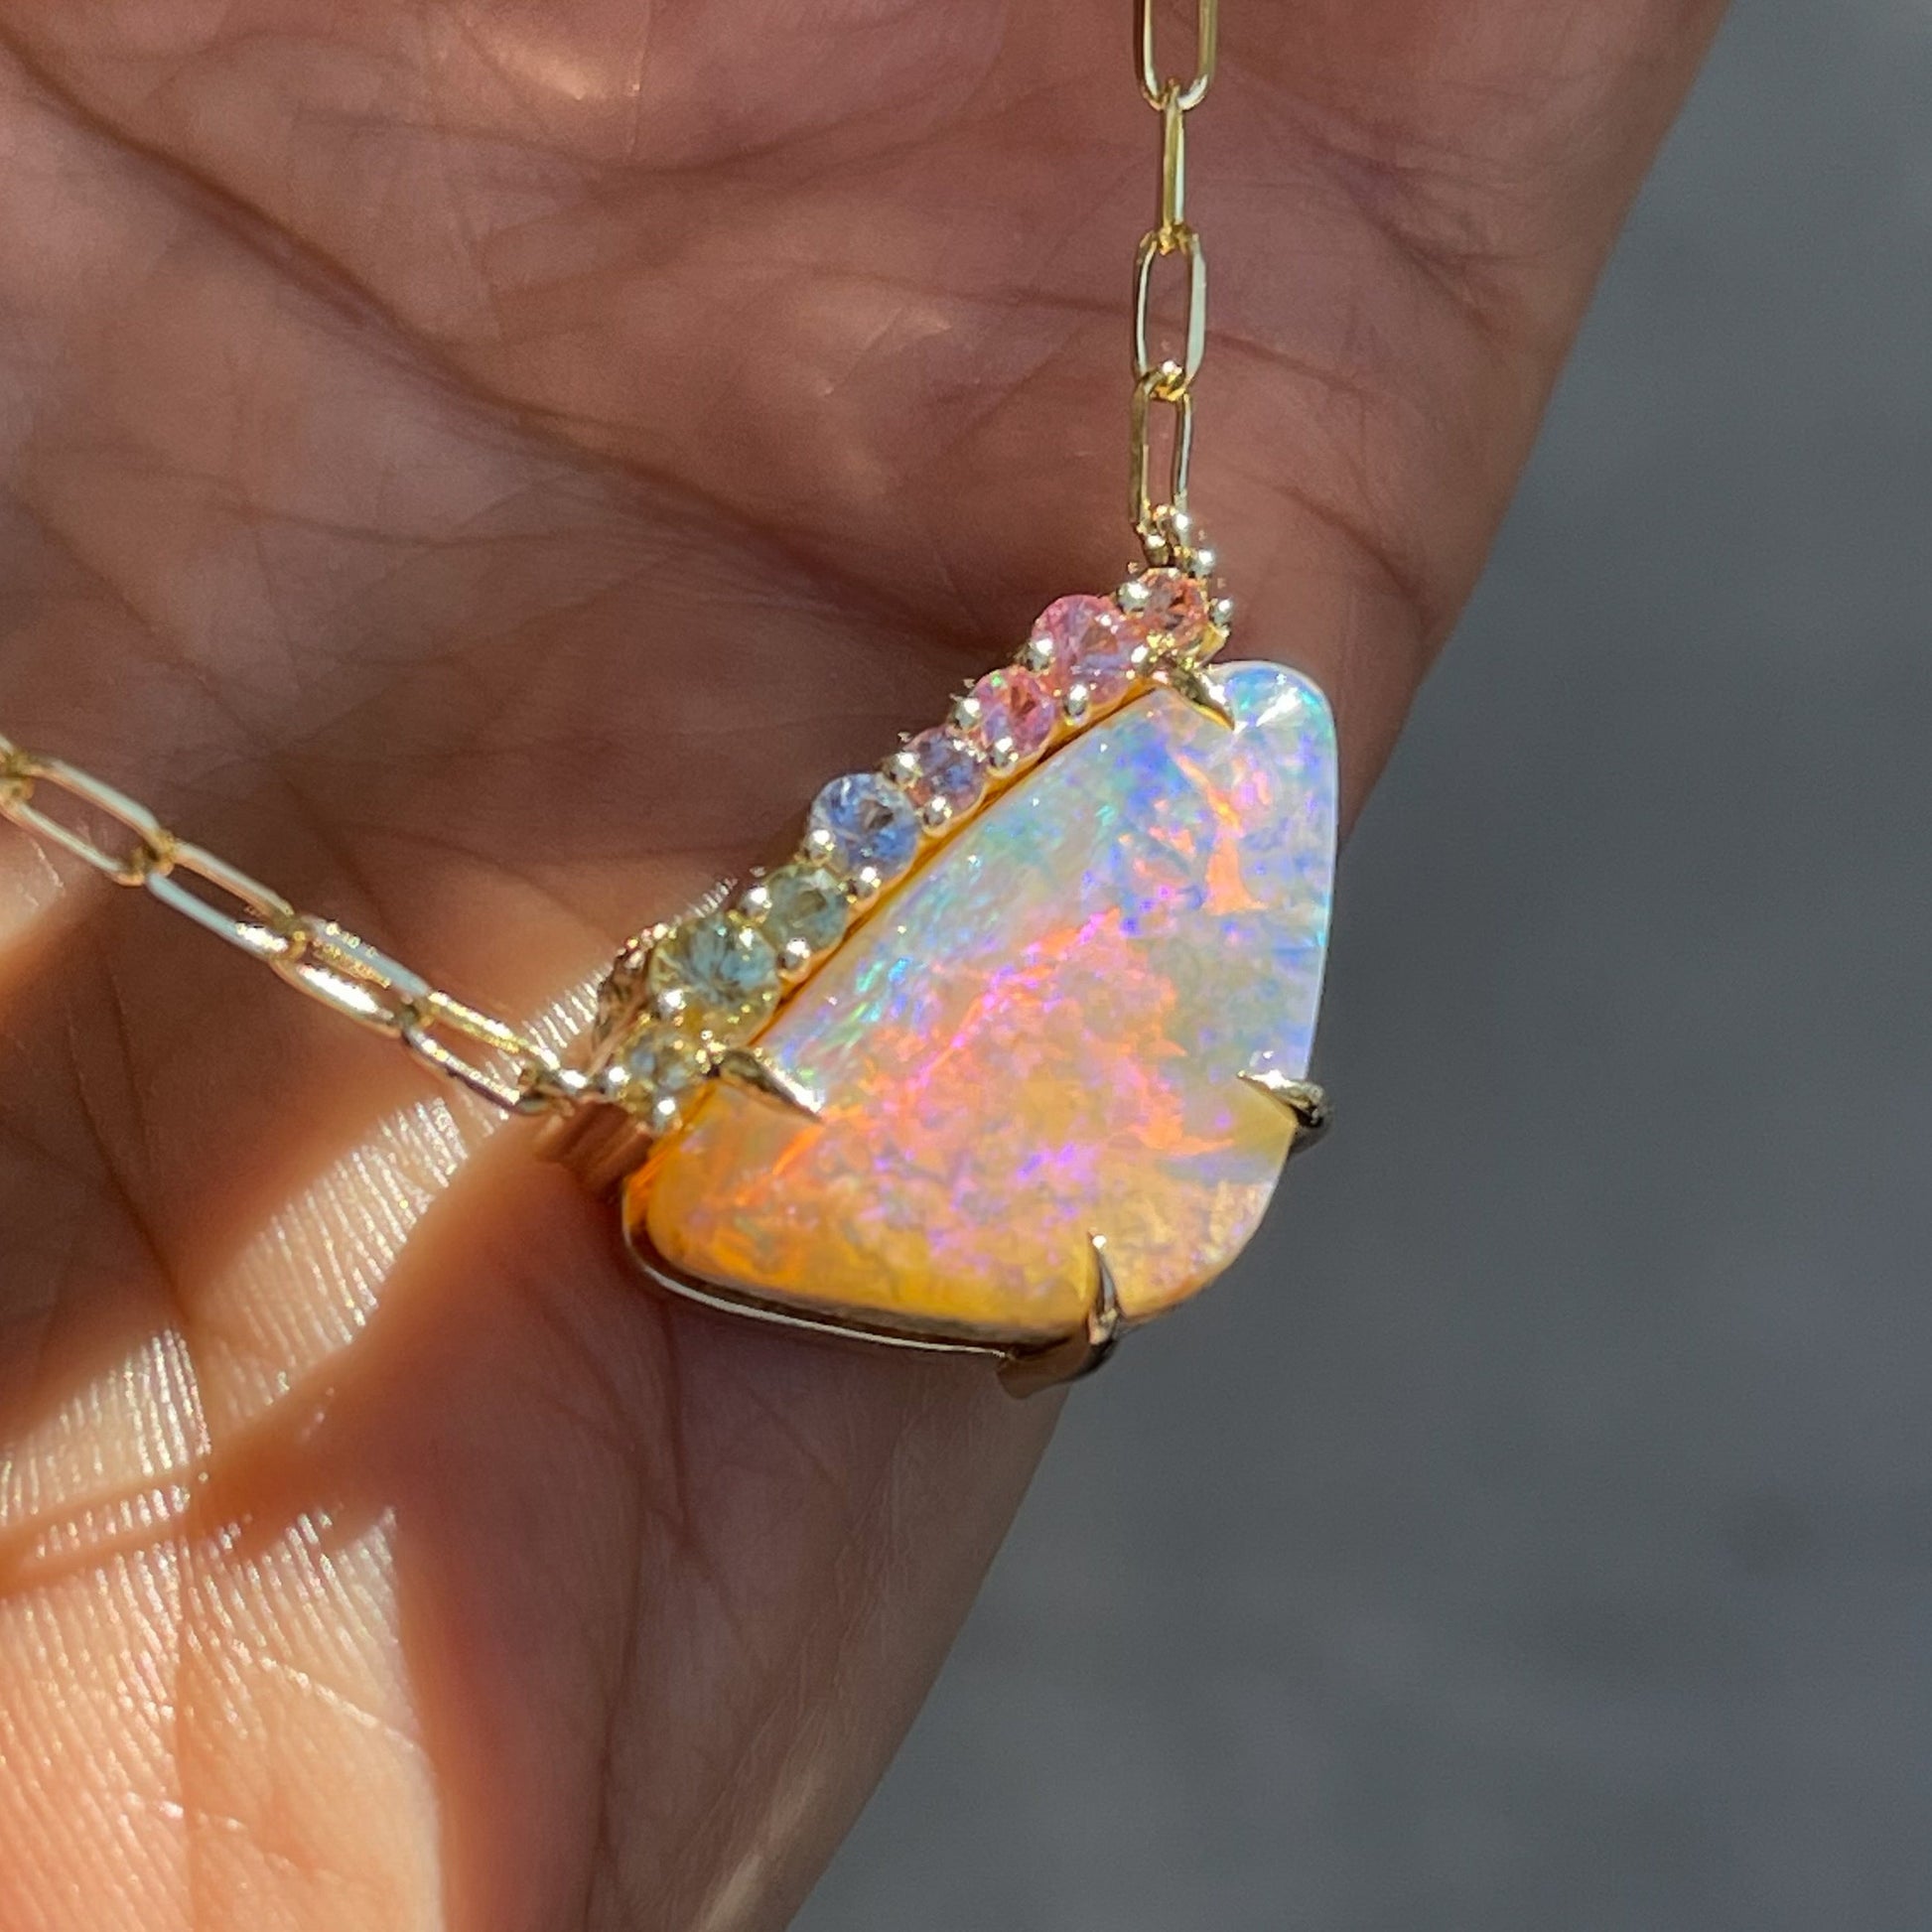 An Australian Opal Necklace by NIXIN Jewelry is shown resting on a hand, as the opal and sapphires sparkle in the sun.